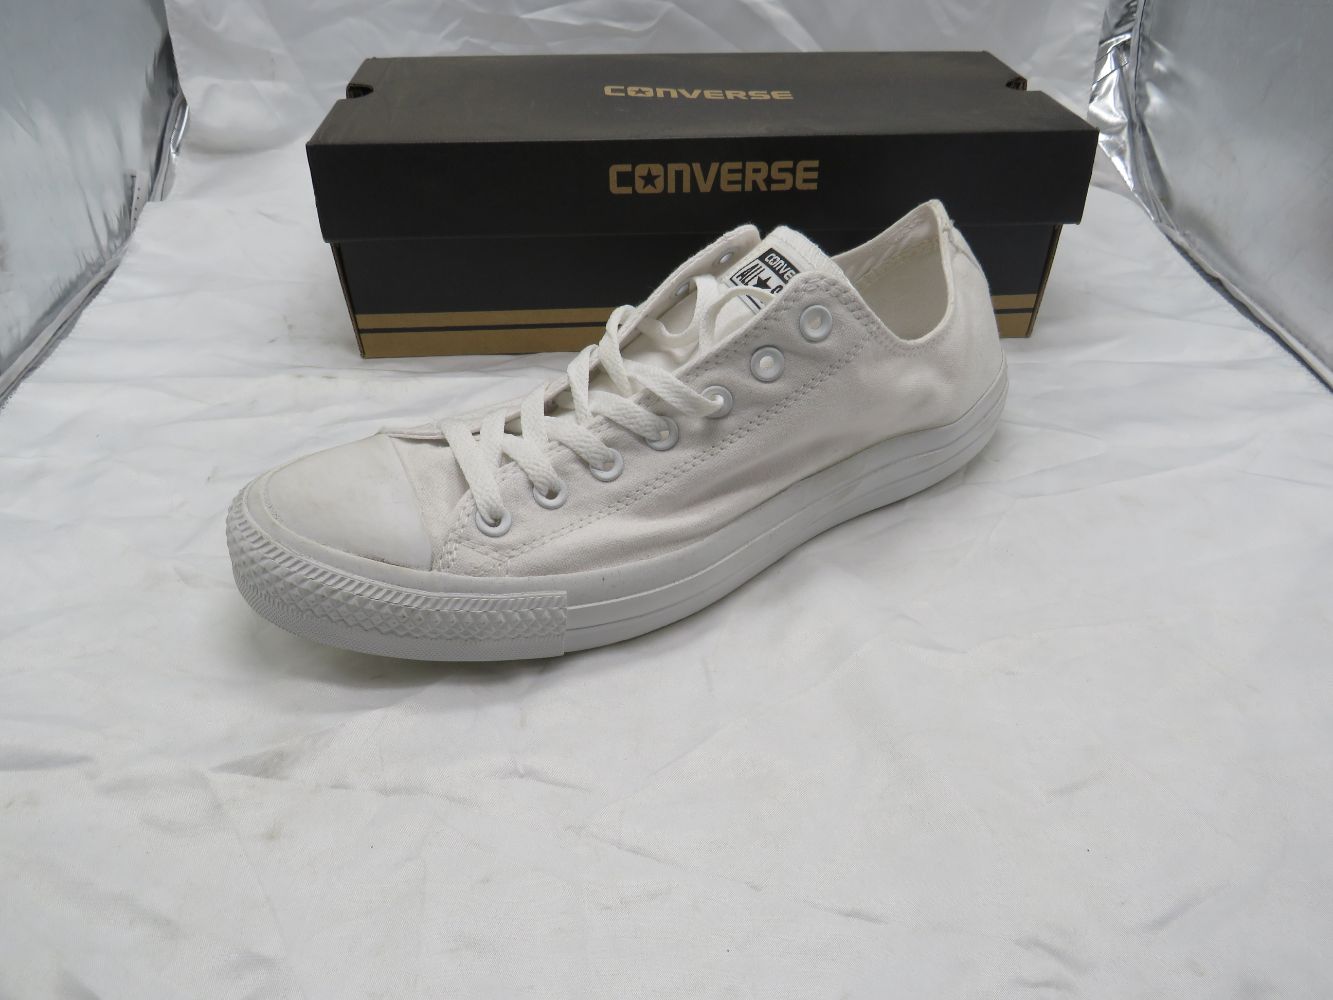 Converse all star trainers at just £10 start!